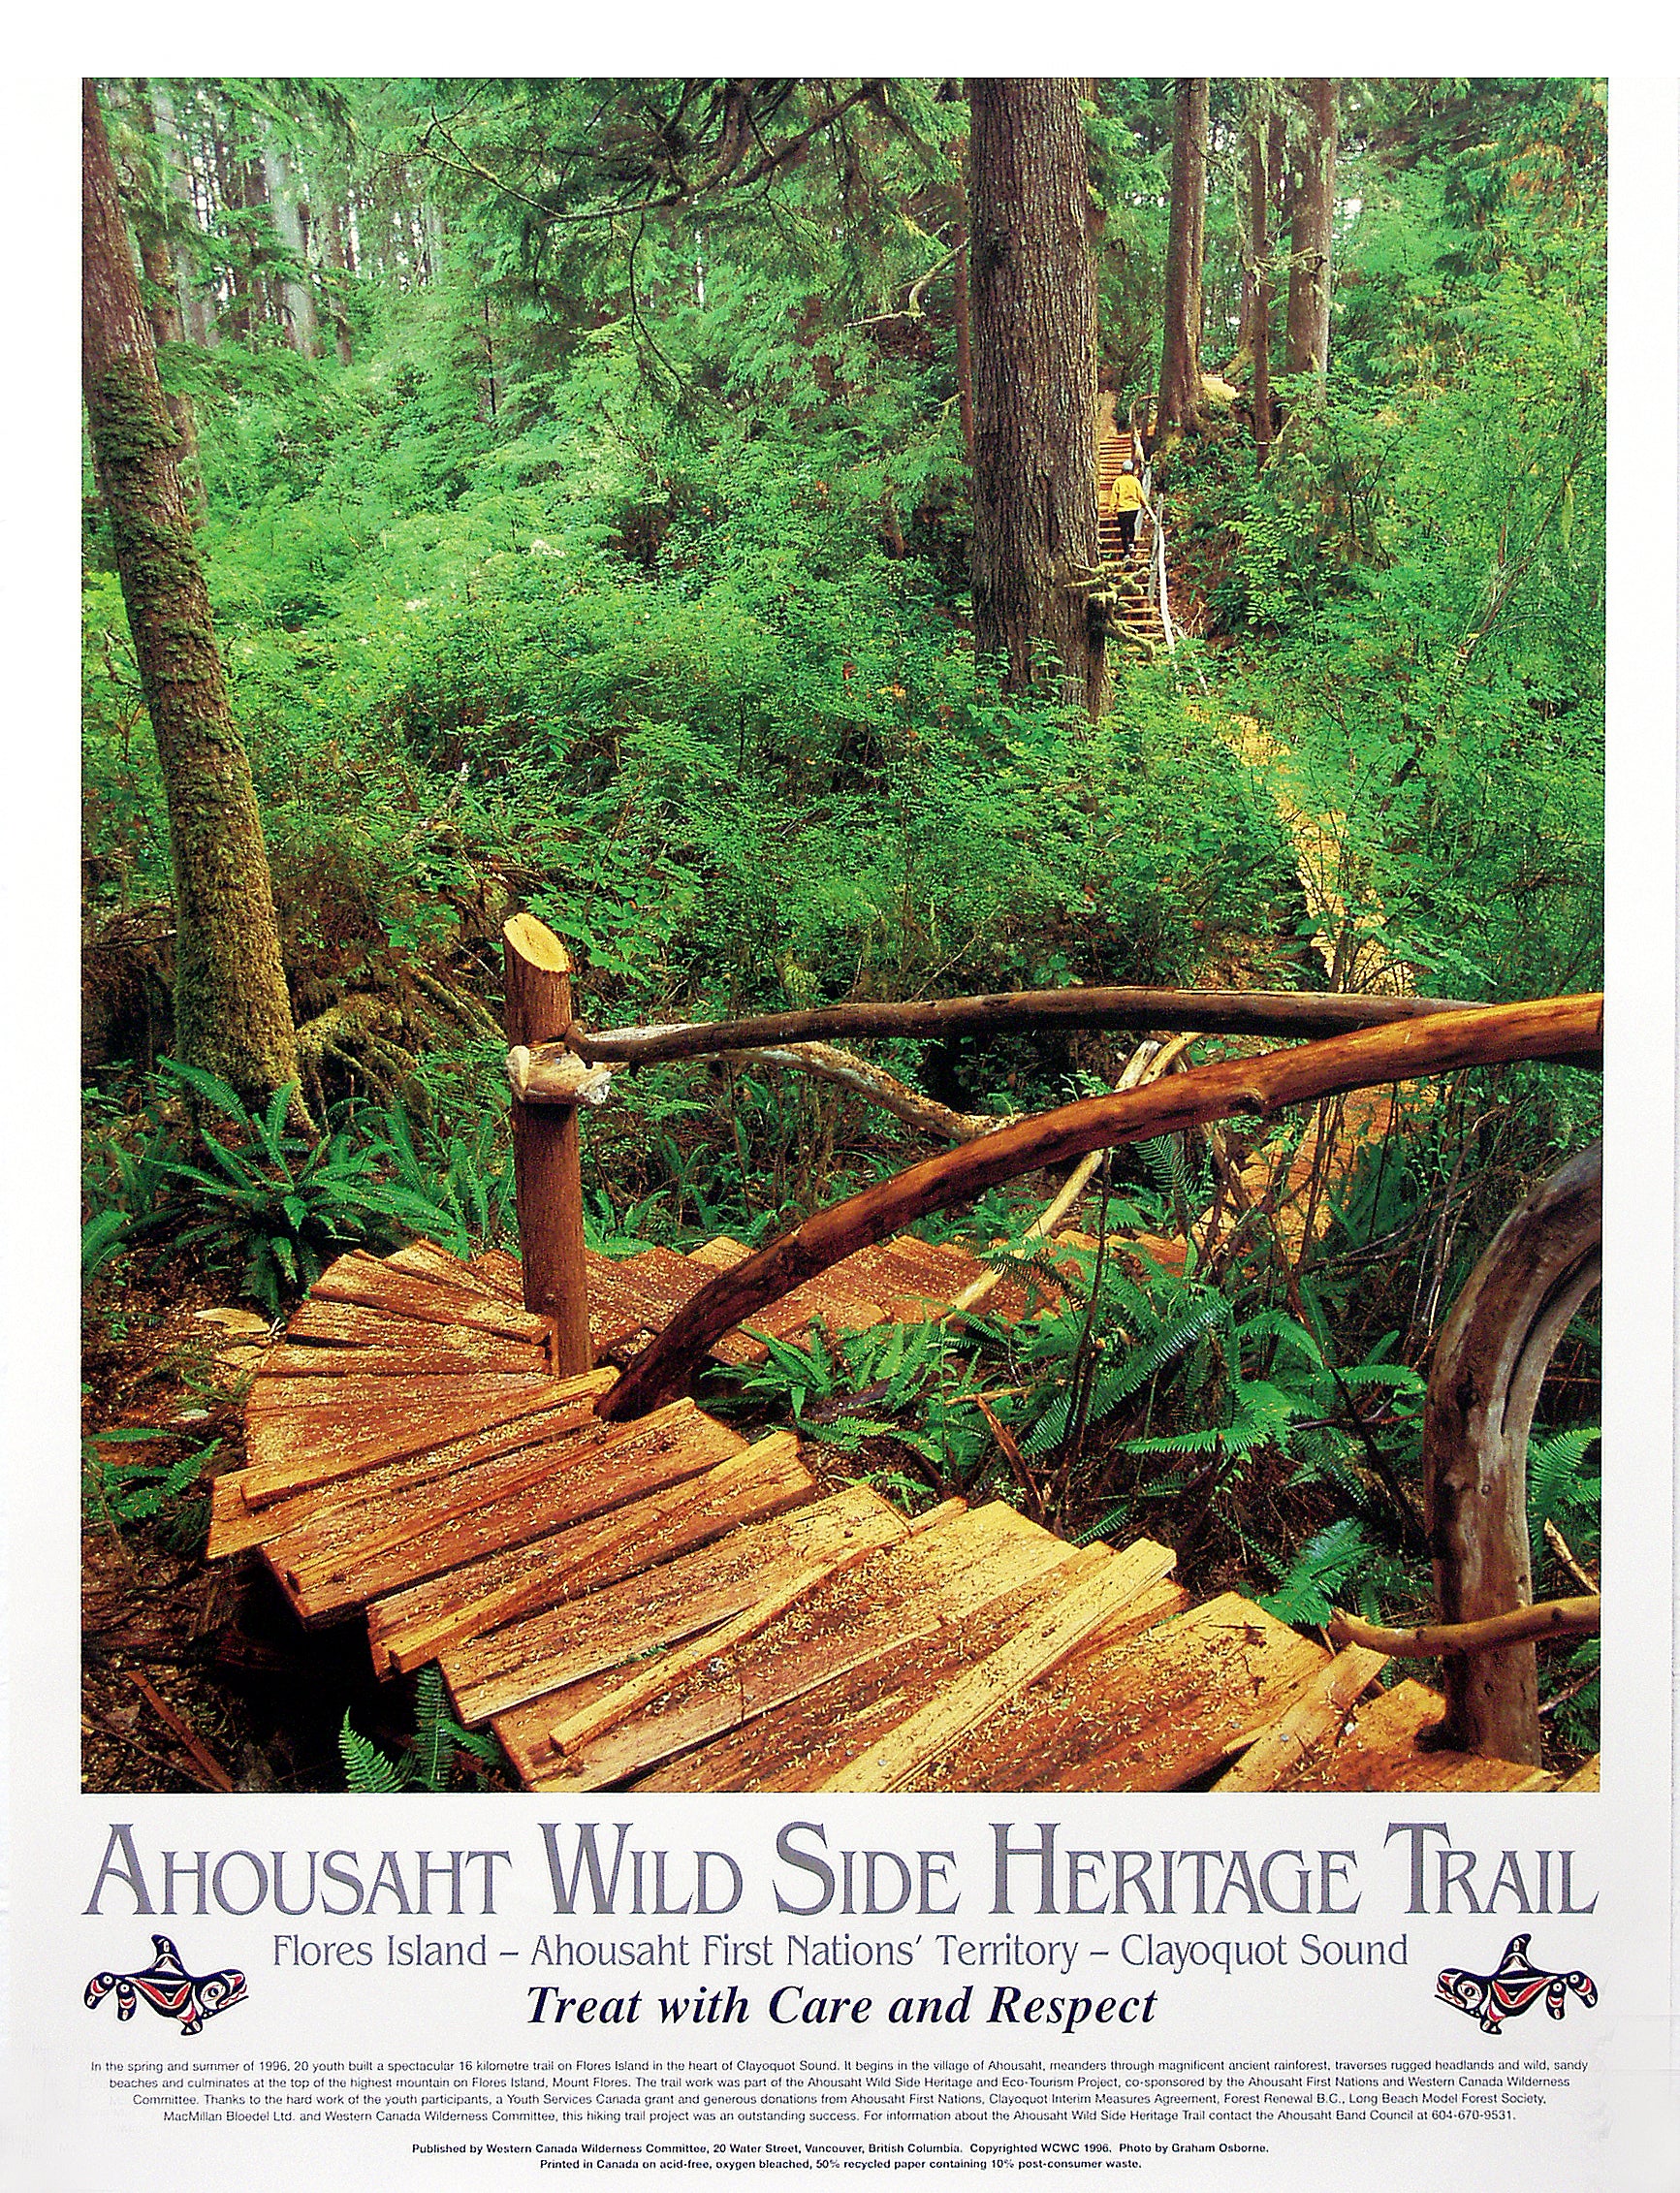 A poster with an image of a set of wooden stairs heading down a path in the forest. Text on the poster says "Ahousaht Wild Side Heritage Trail. Flores Island - Ahousaht First Nations' Territory - Clayquot Sound. Treat with Care and Respect." There are Ahousaht paintings of orcas on either side of the text. End of image description.